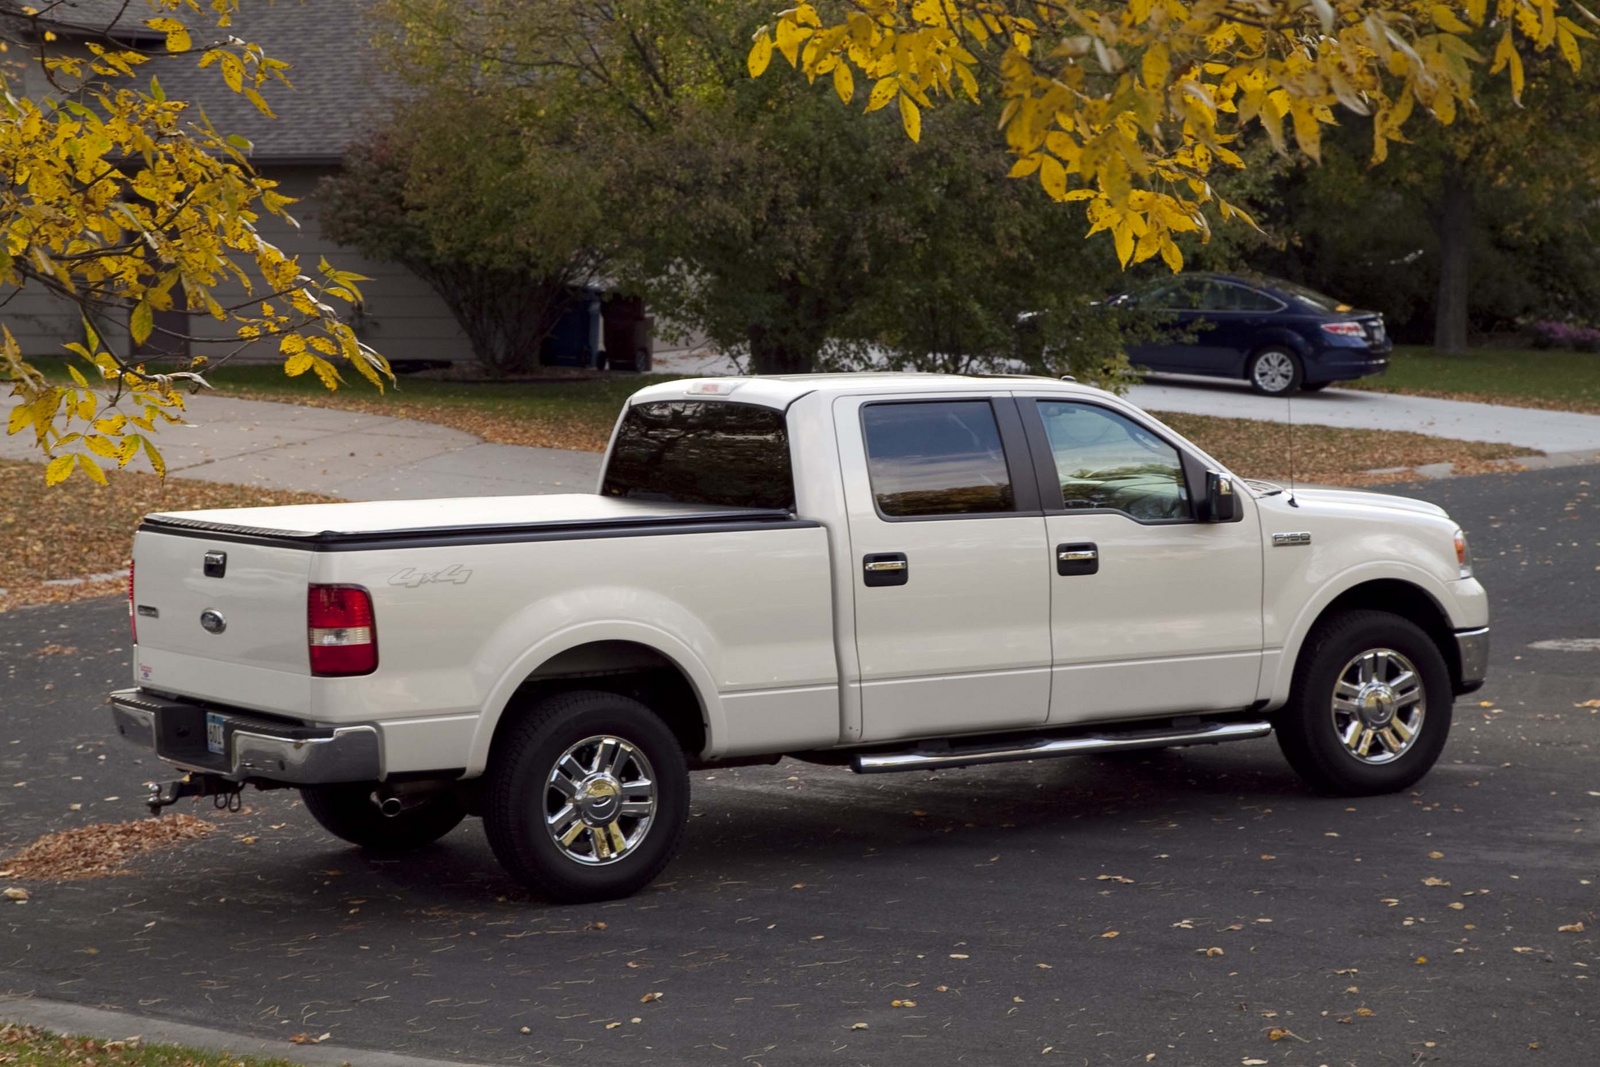 2007 Ford f150 supercrew lariat 4x4 reviews #2